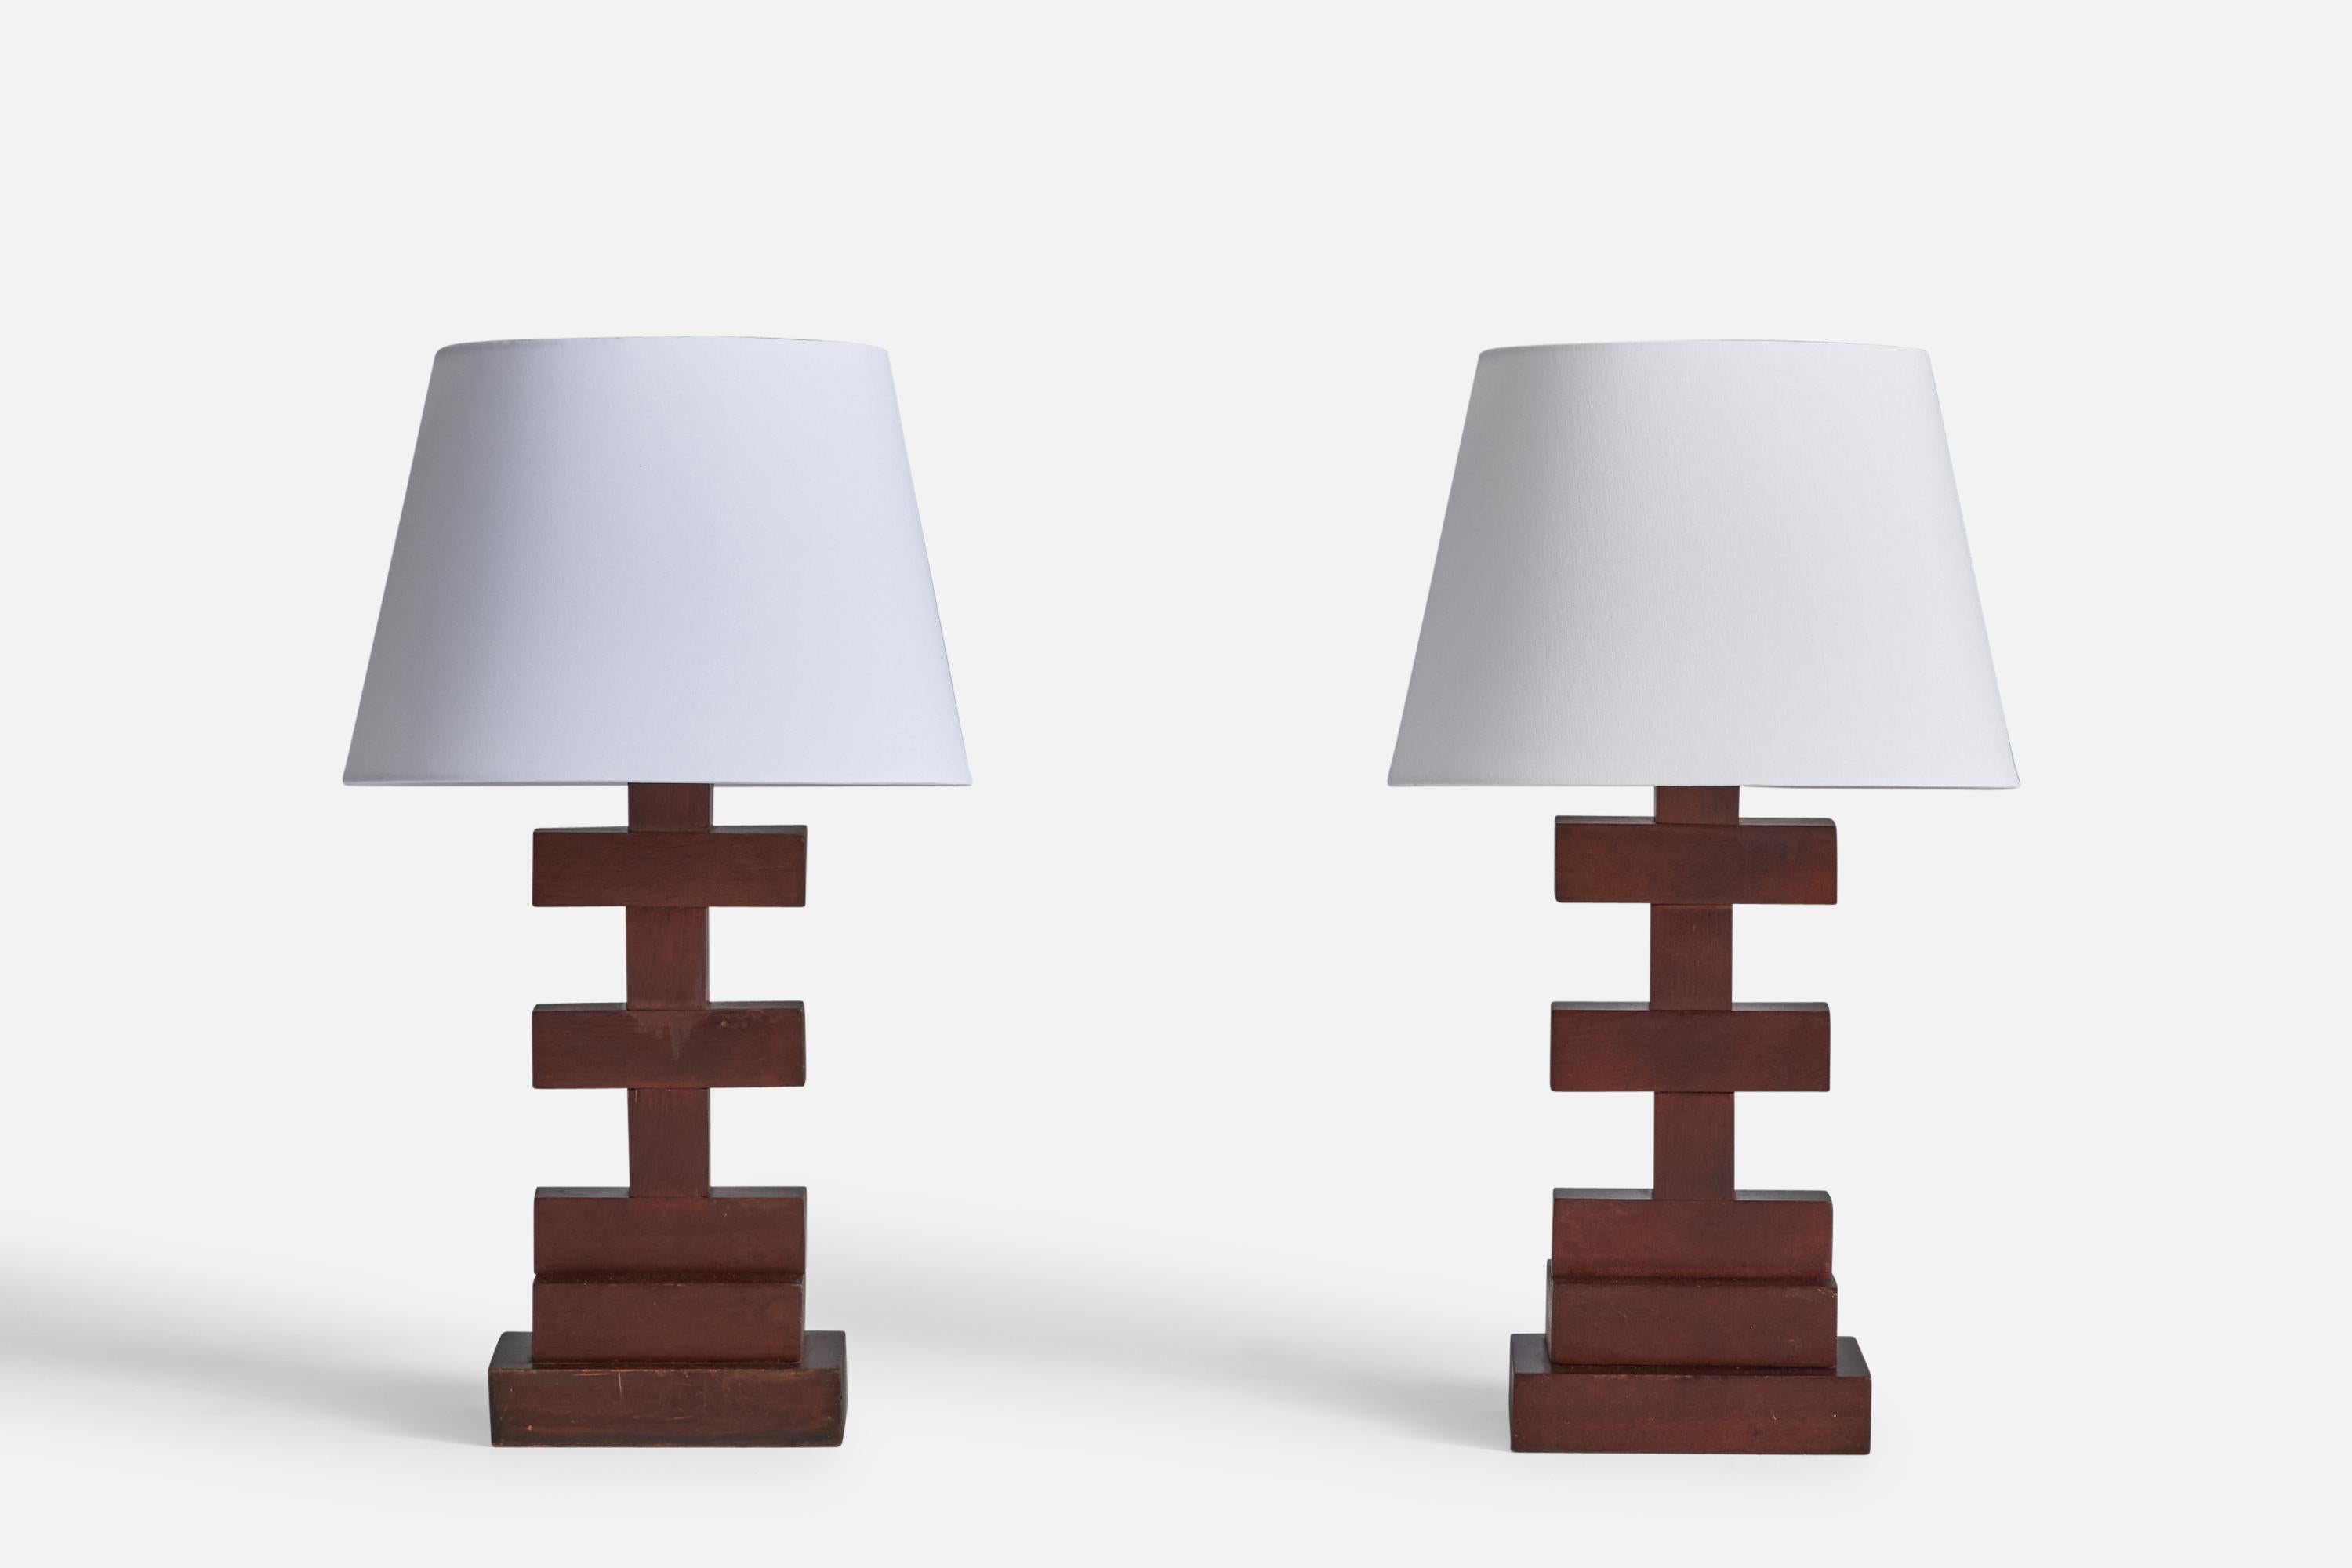 A pair of sizeable walnut table lamps designed and produced in the US, c. 1940s.

Dimensions of Lamp (inches): 18.5”  H x 5.5” Diameter
Dimensions of Shade (inches): 10